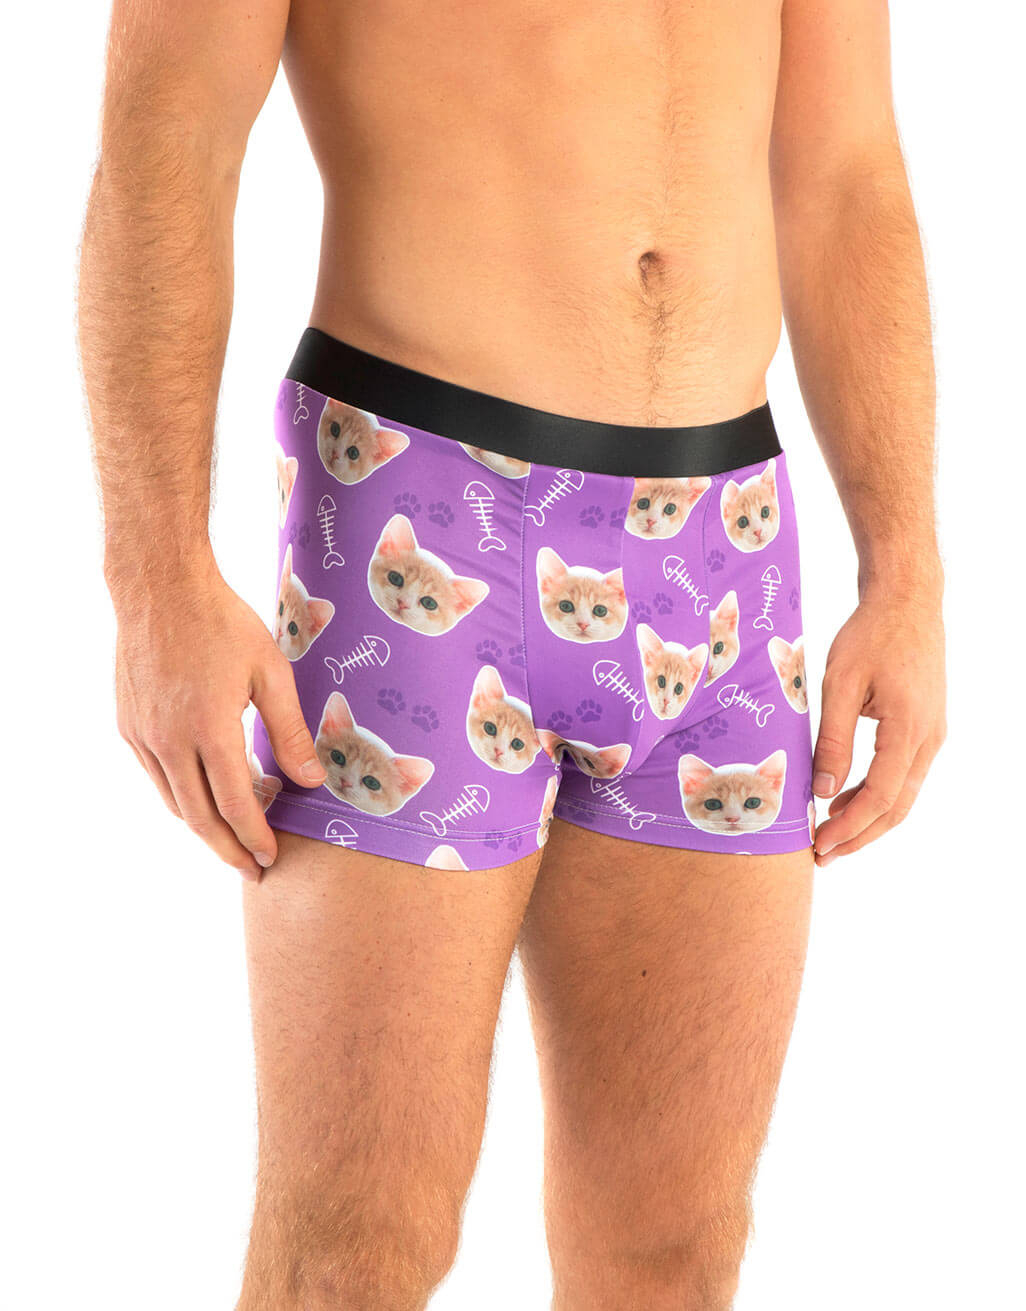 Your Cat on Custom Boxers - Personalized Boxers